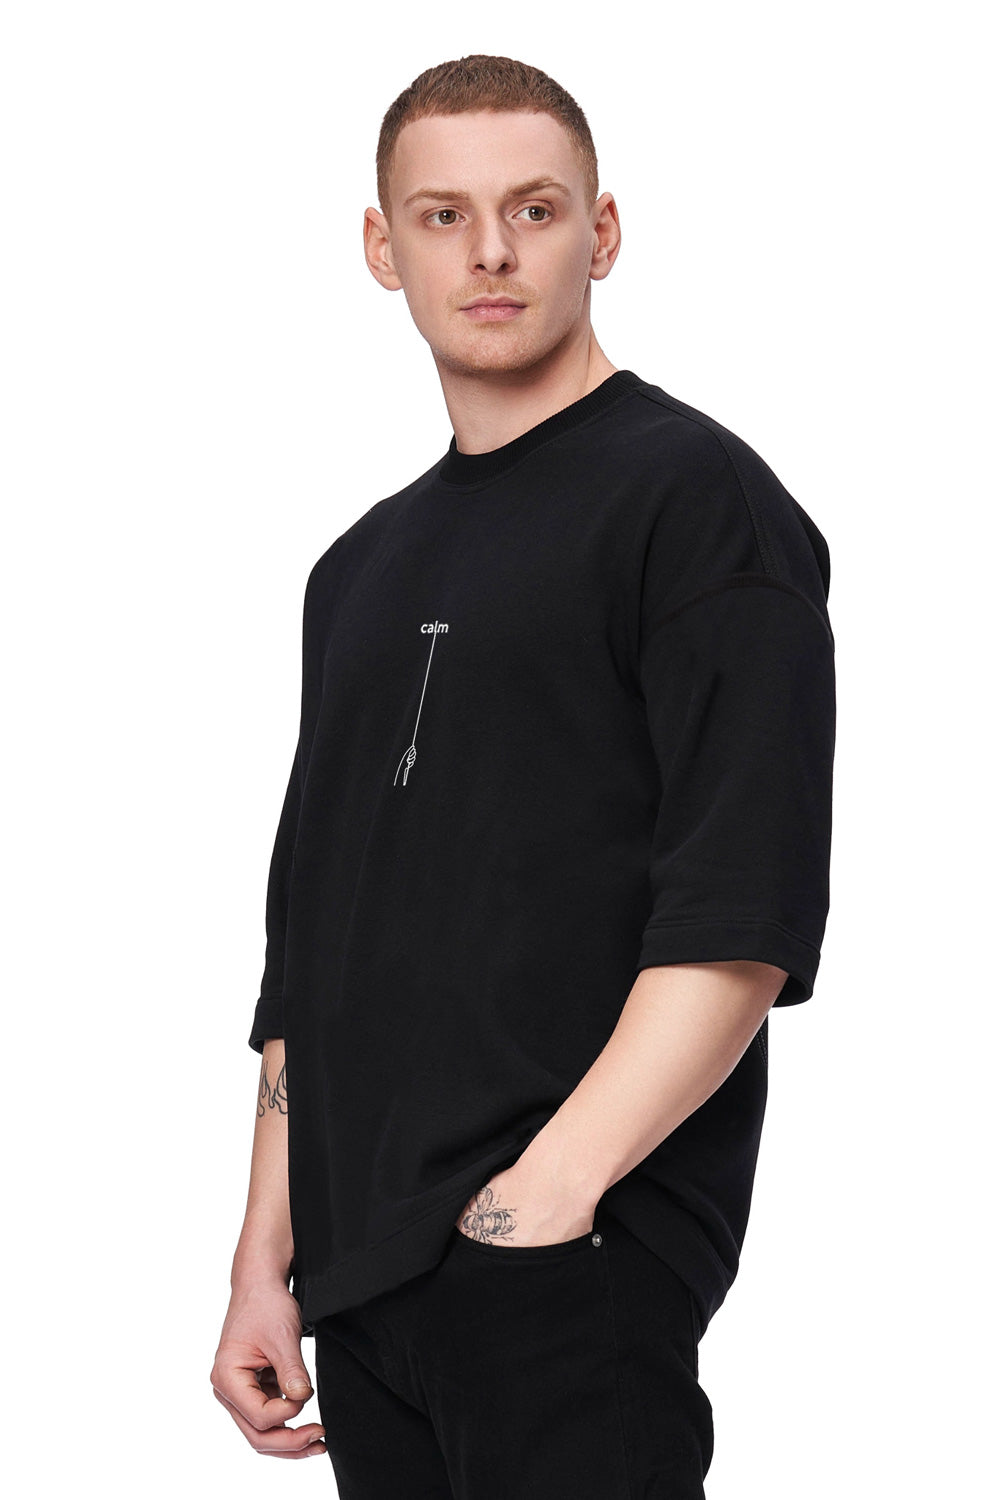 ROAD embroidered T-shirt